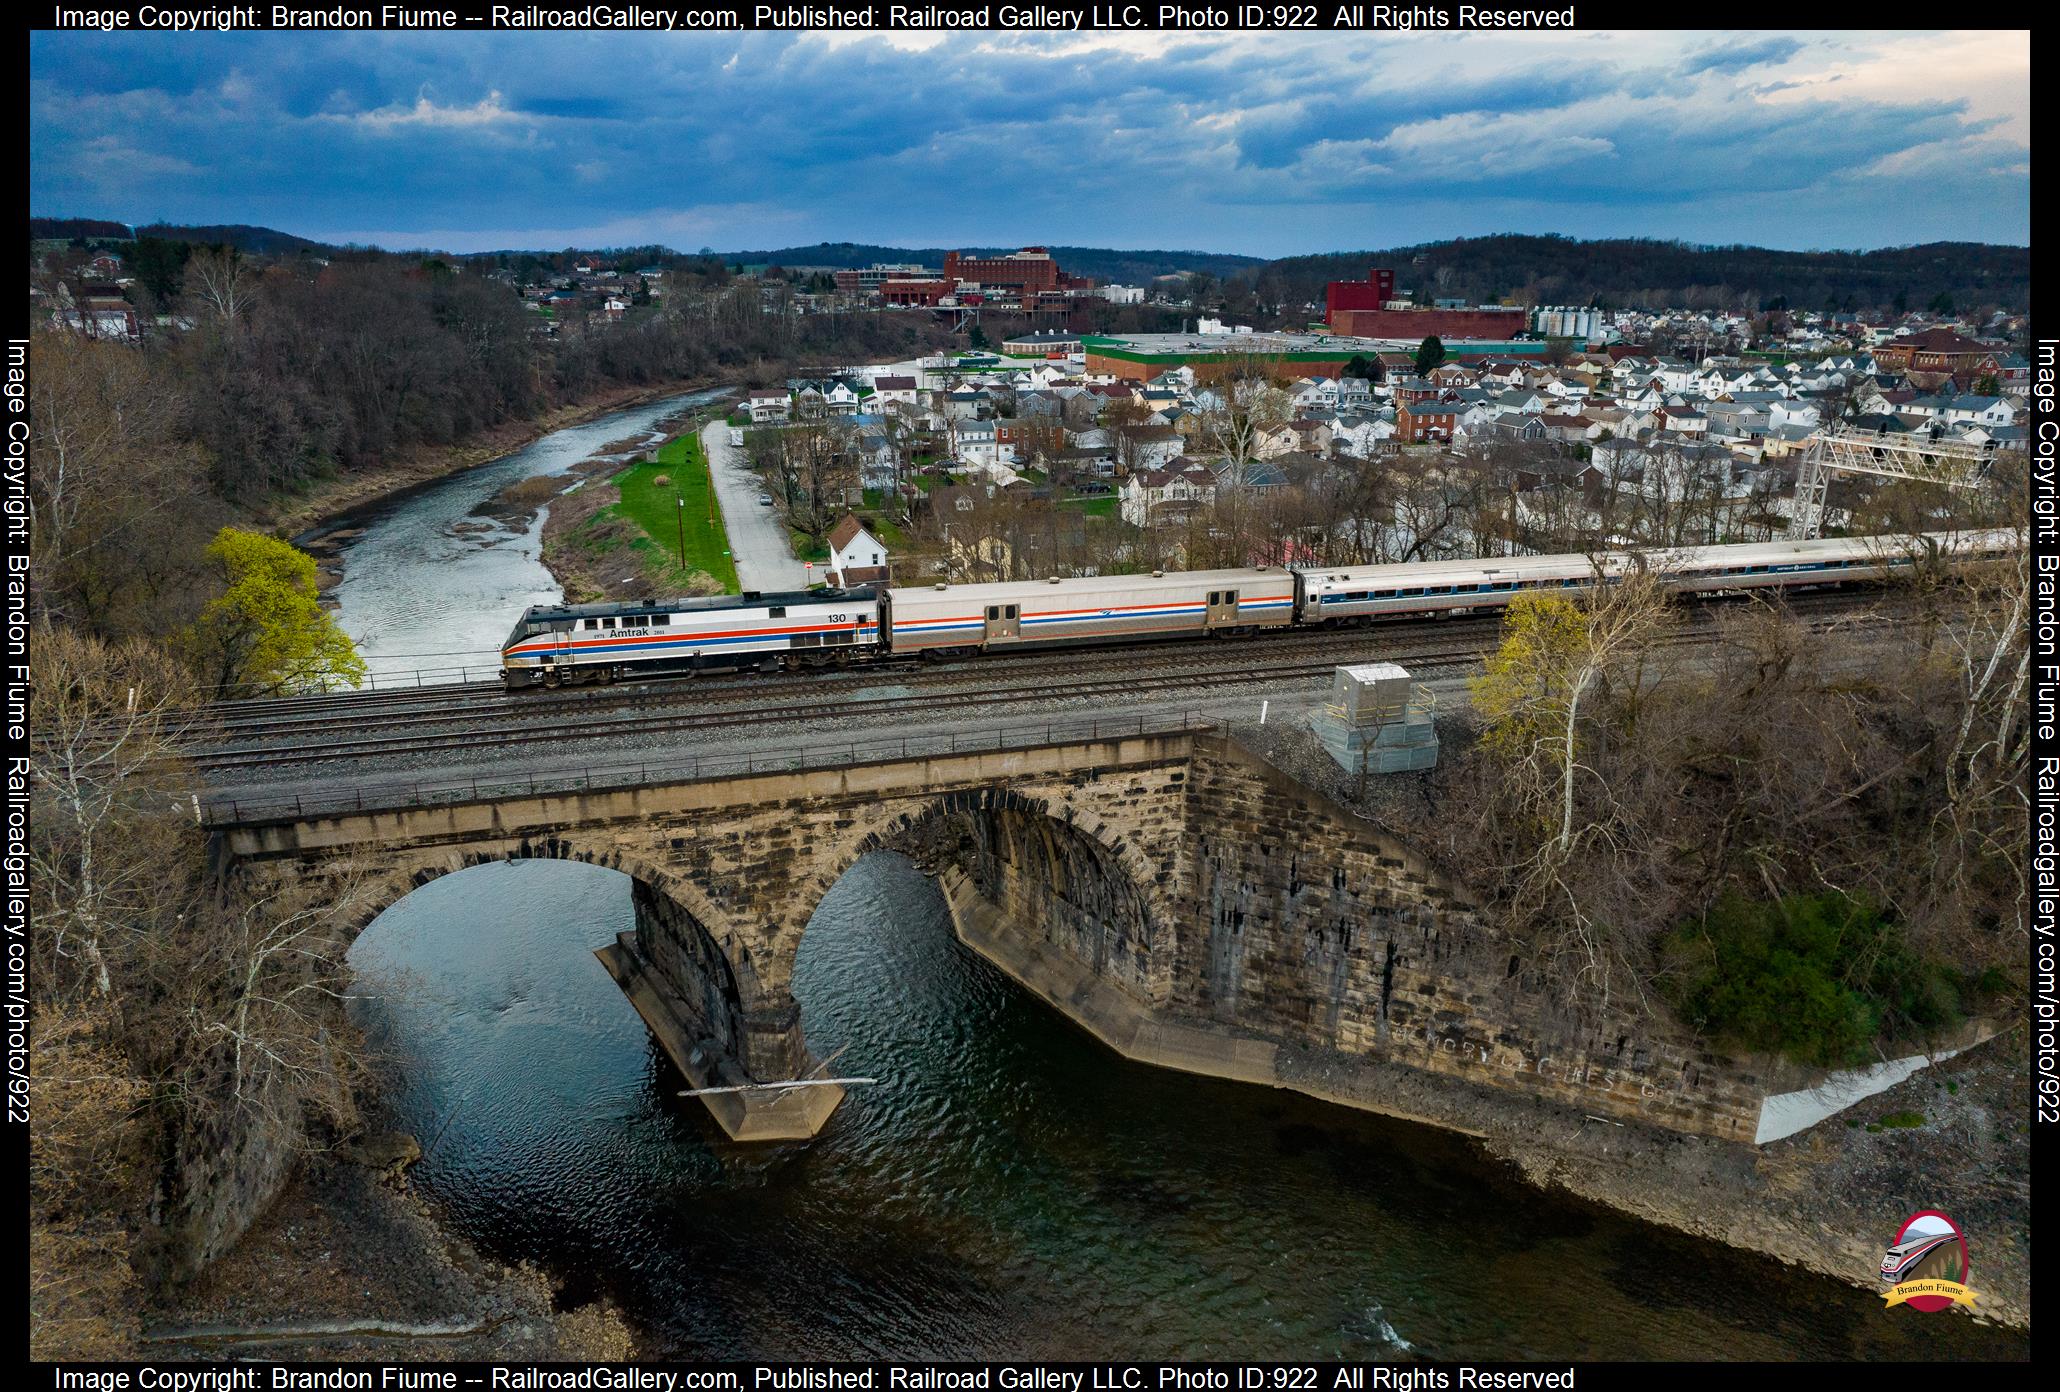 AMTK 130 is a class GE P42DC and  is pictured in Latrobe, Pennsylvania, USA.  This was taken along the Pittsburgh Line on the Amtrak. Photo Copyright: Brandon Fiume uploaded to Railroad Gallery on 04/05/2023. This photograph of AMTK 130 was taken on Wednesday, April 05, 2023. All Rights Reserved. 